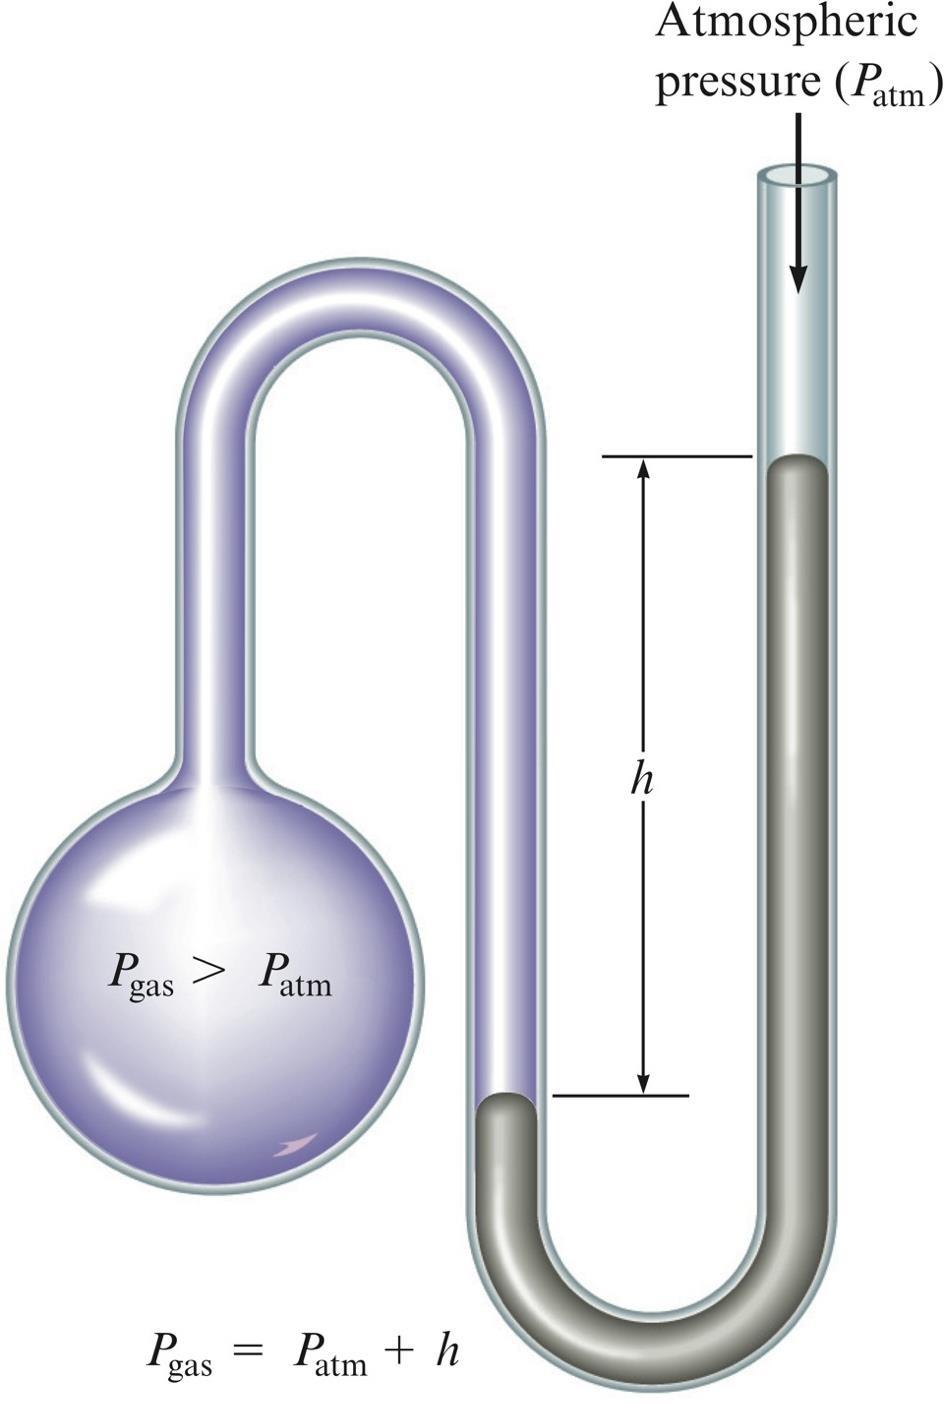 Manometer A device